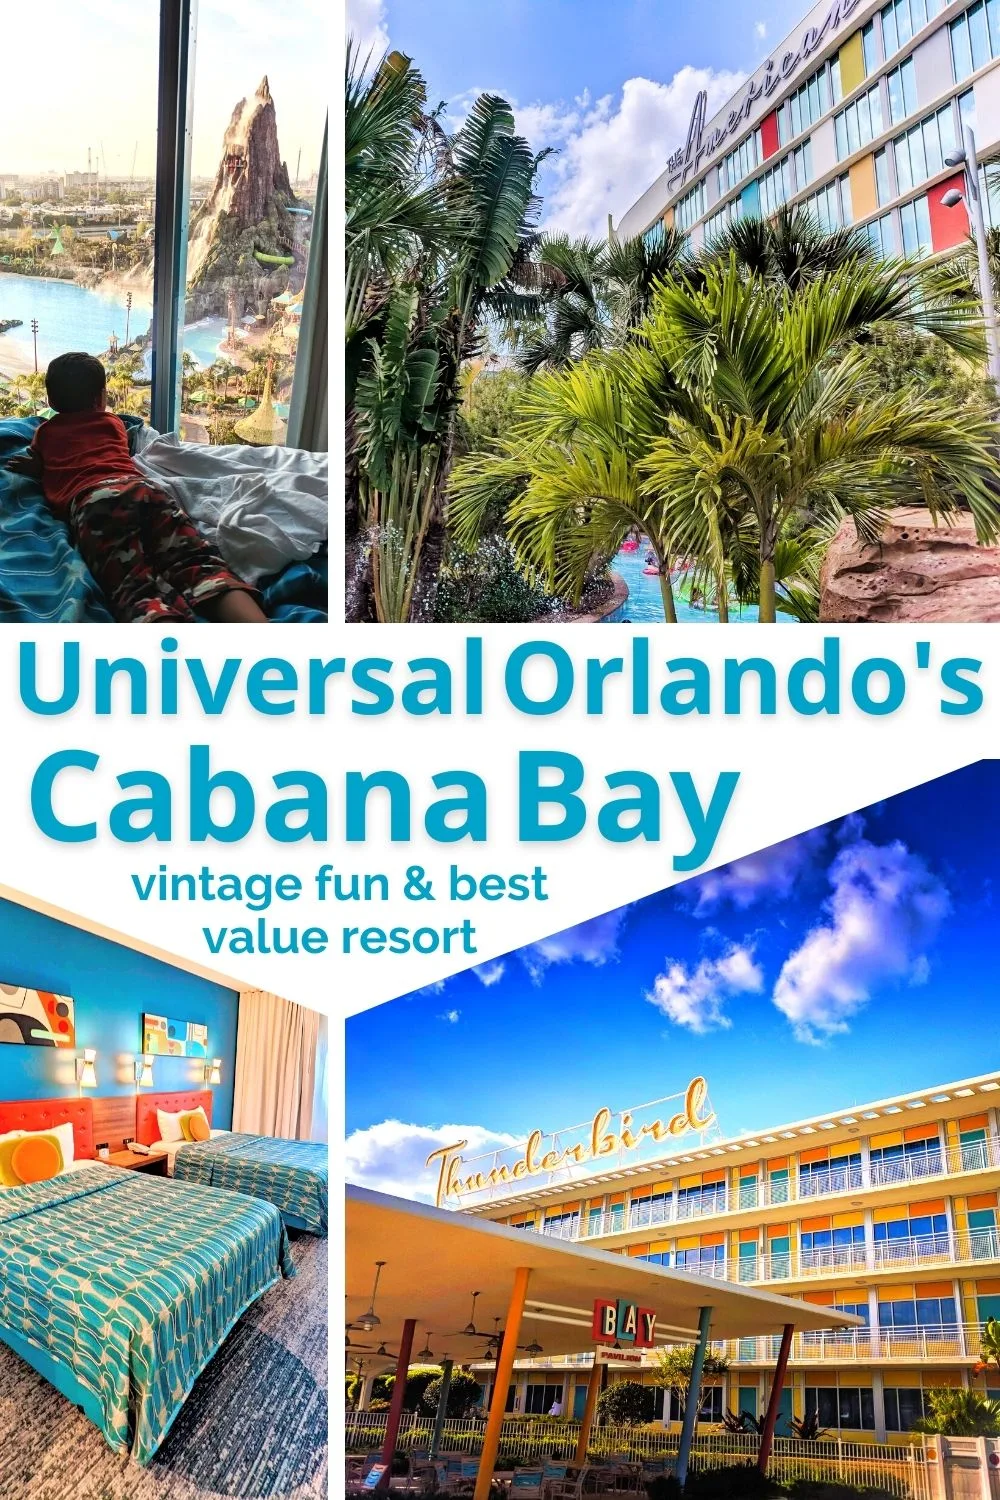 Universal's Cabana Bay Beach Resort has been our favorite for years. Providing both the best value and the most fun, Cabana Bay is our top pick at Universal Orlando Resort. See why!